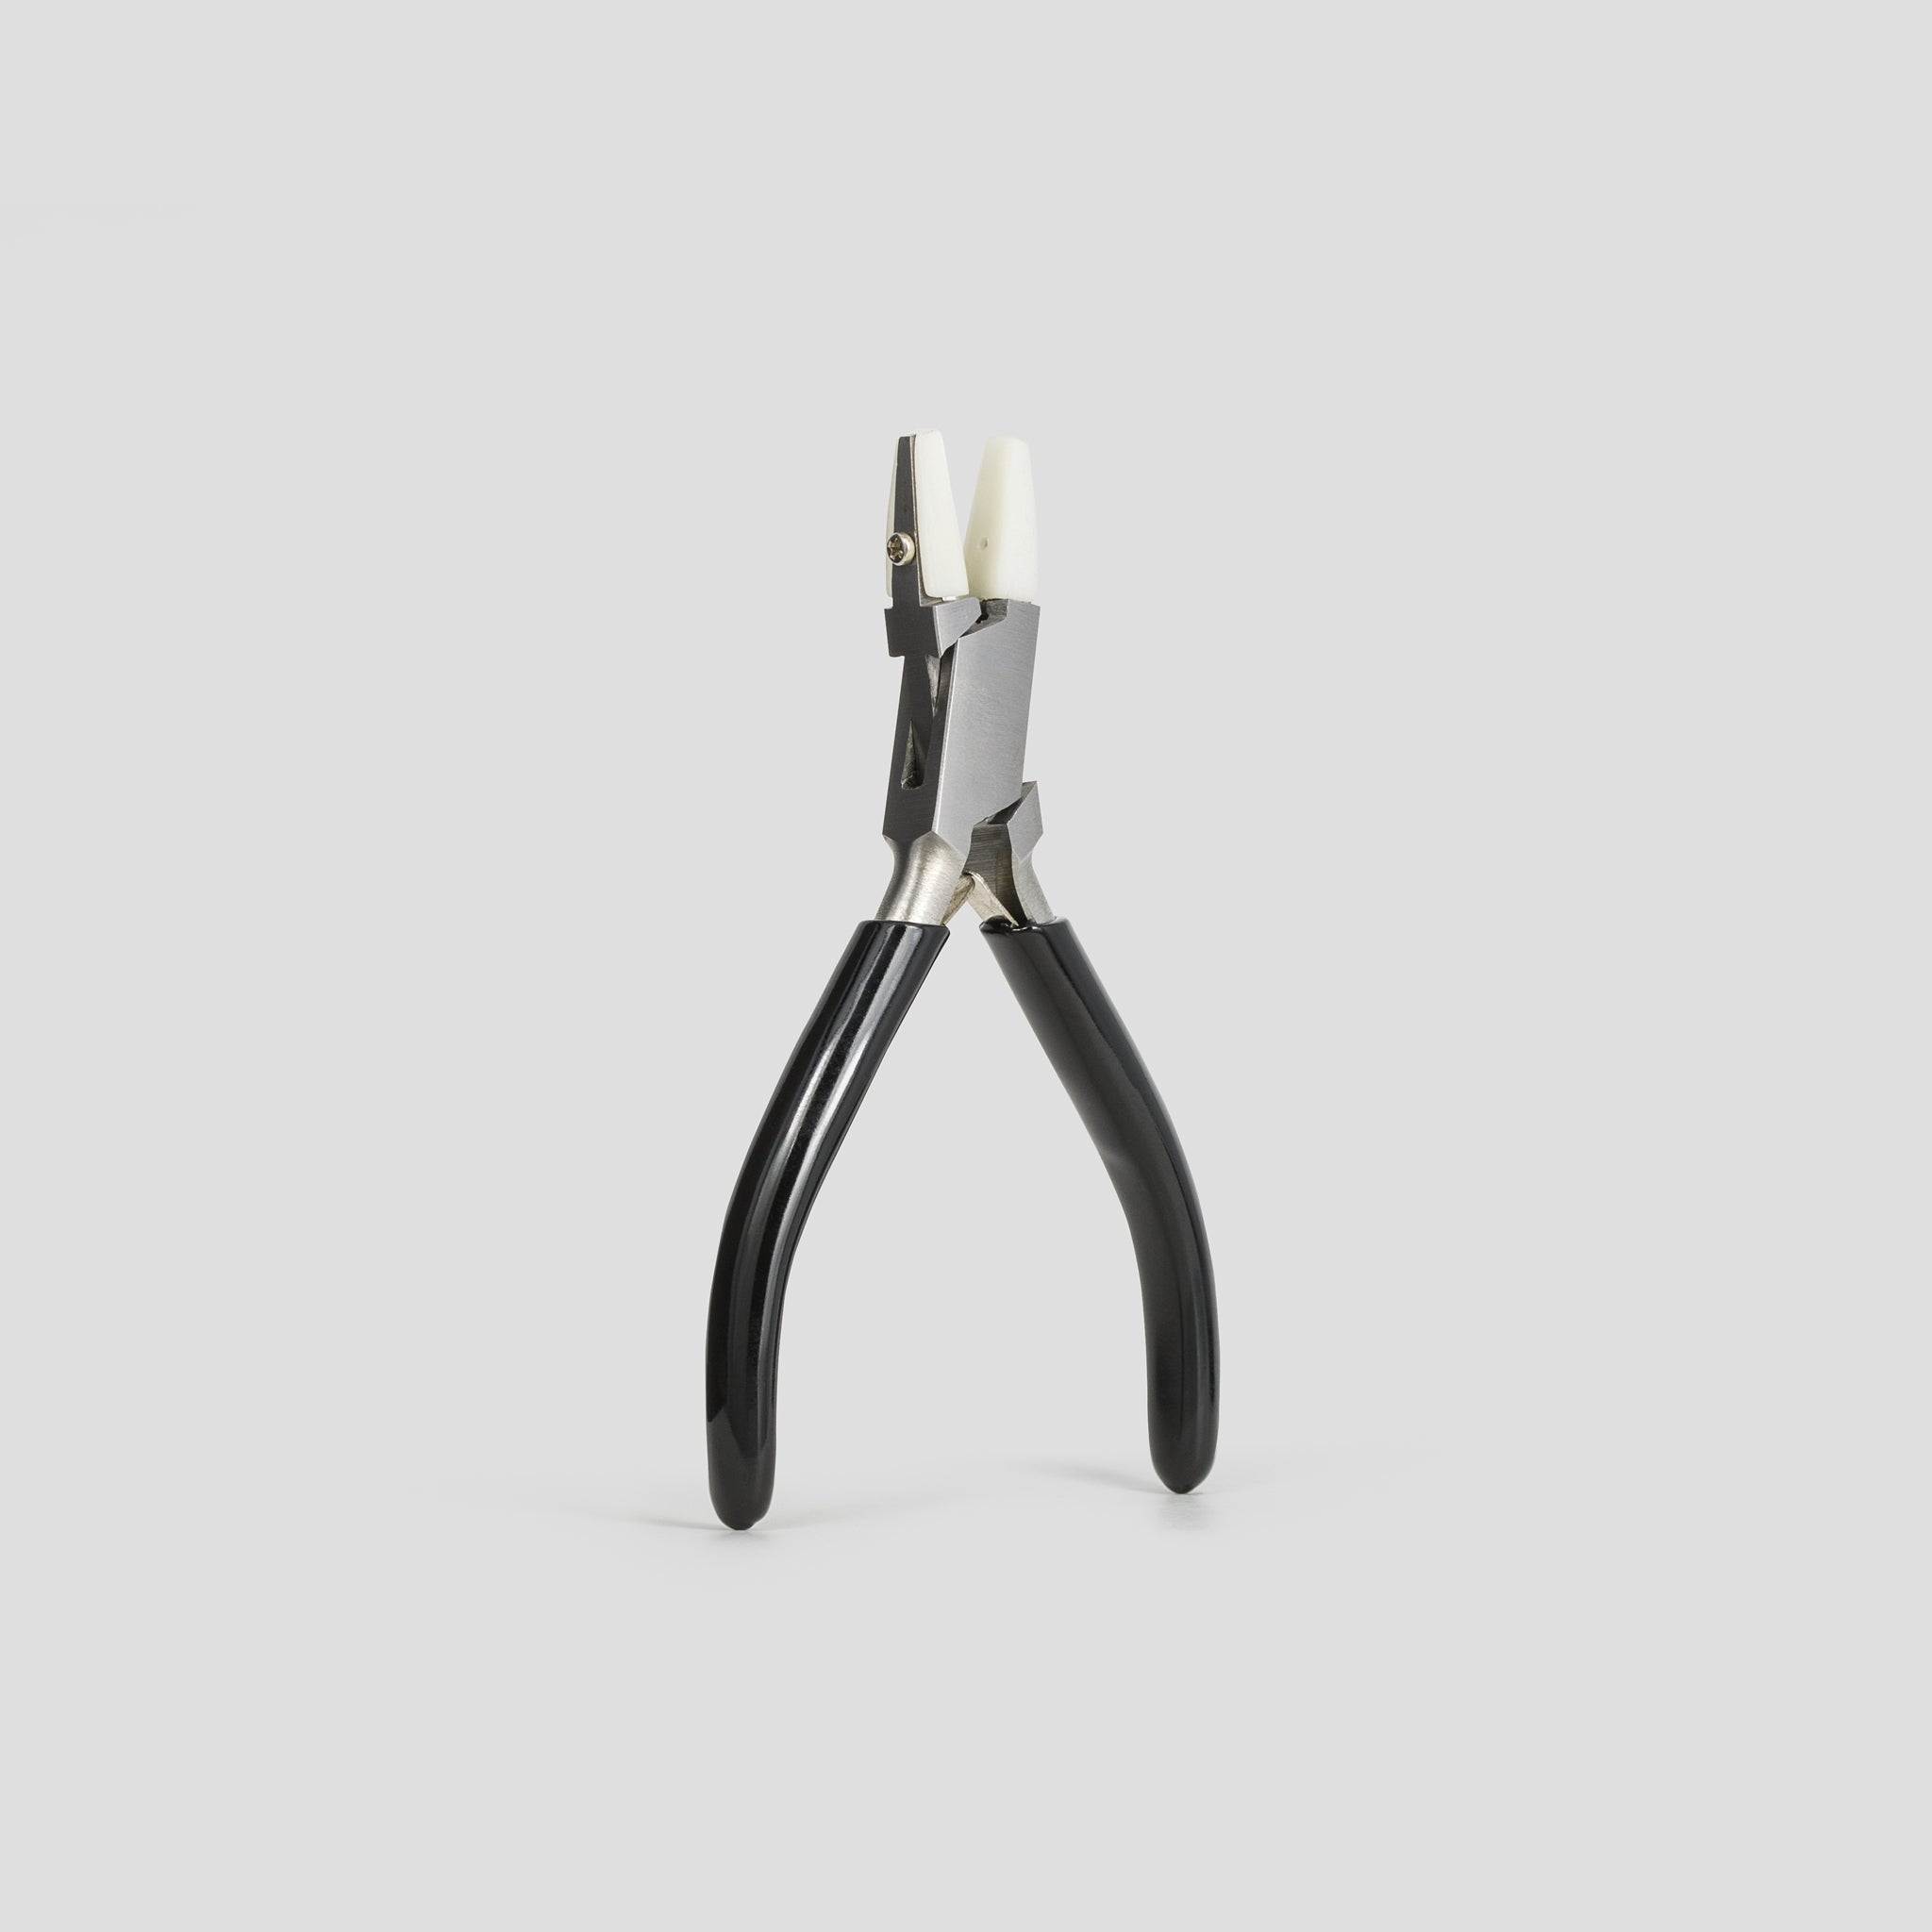 Chain Nose Nylon Jaw Pliers with double leaf spring